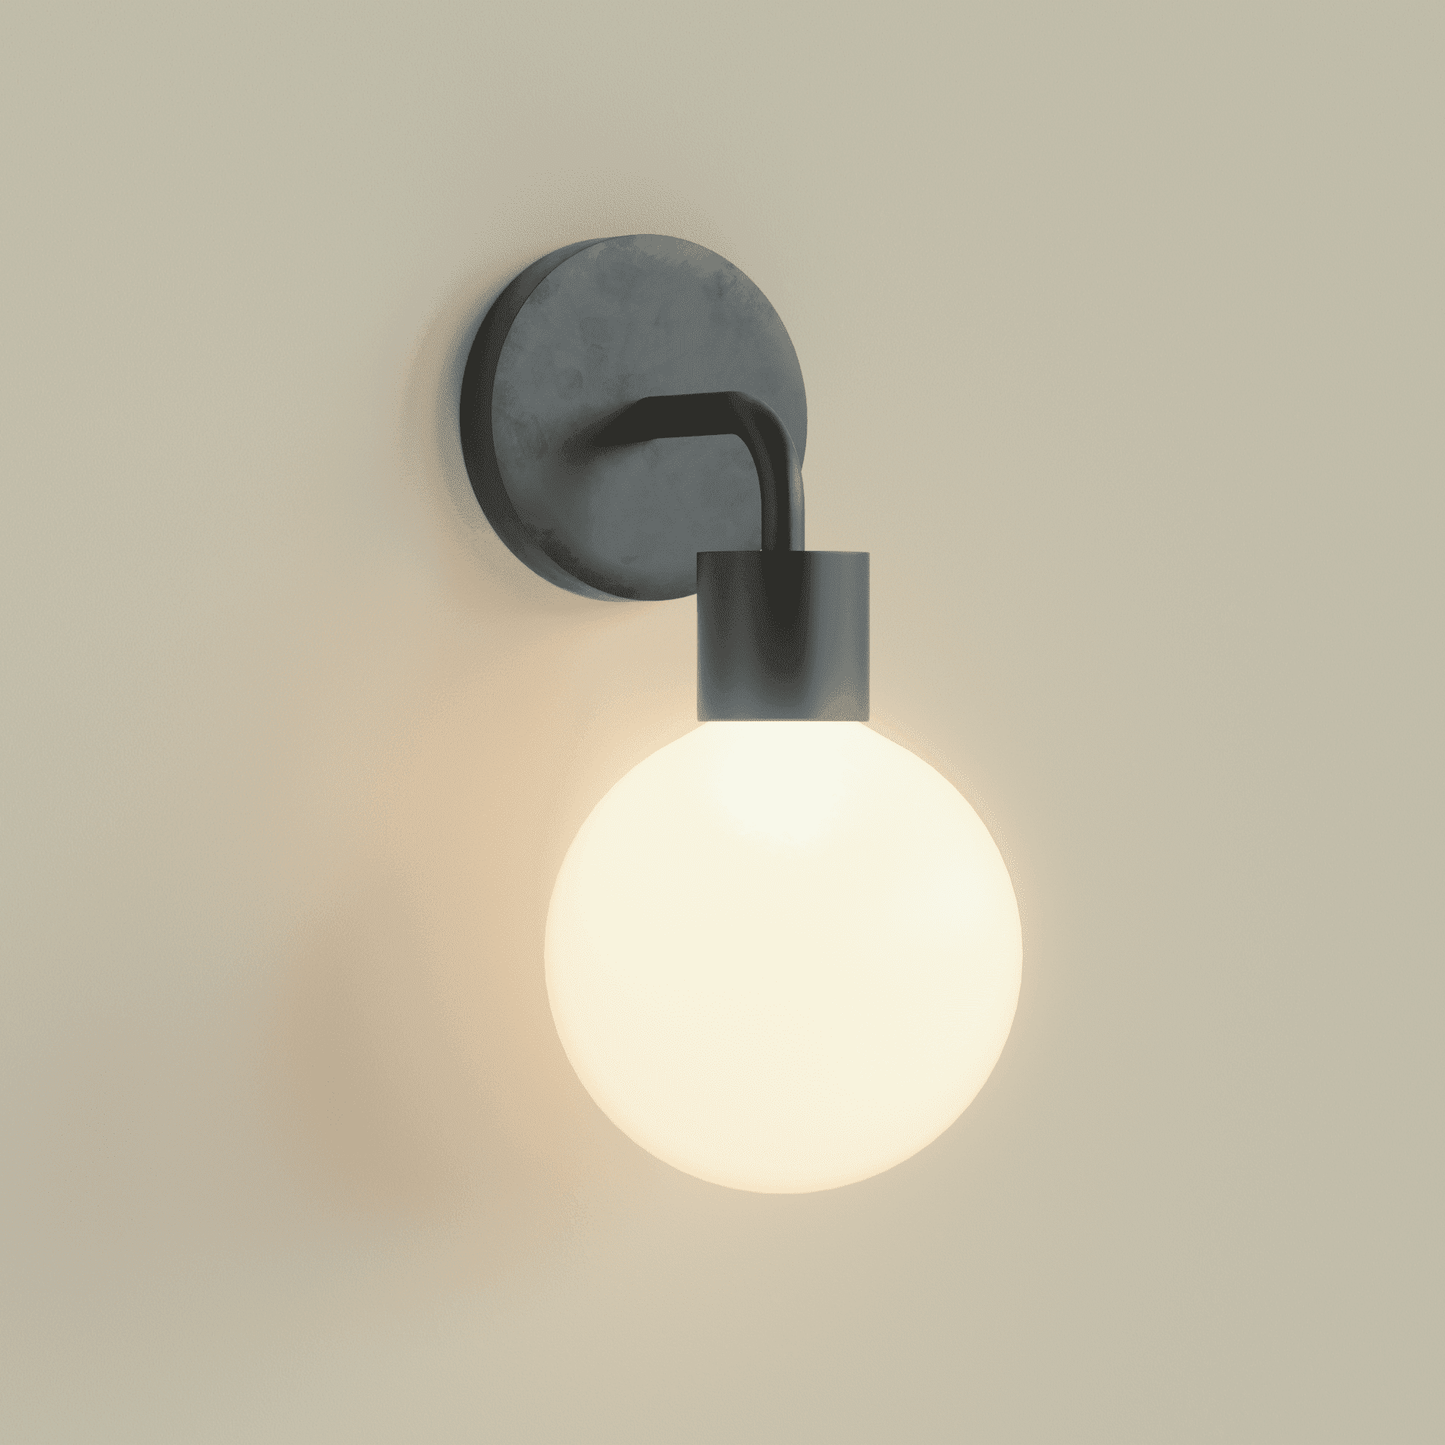 Easy apartment upgrade rechargeable wall lighting wall sconce